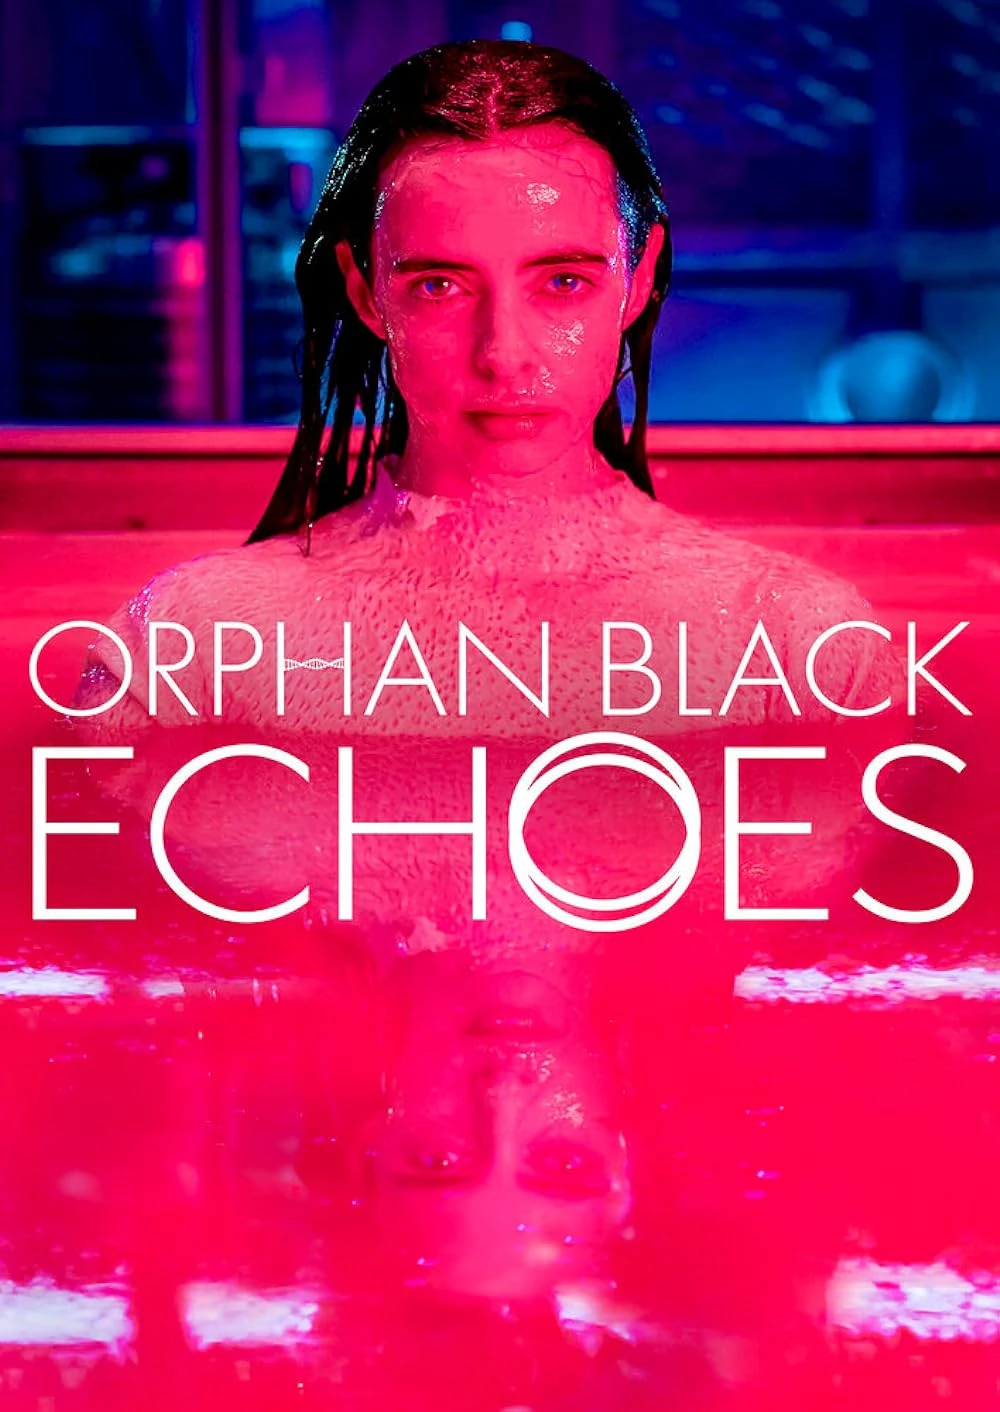 AMC Networks' June Highlights: Orphan Black: Echoes, Domino Day, My Life is Murder & Snowpiercer